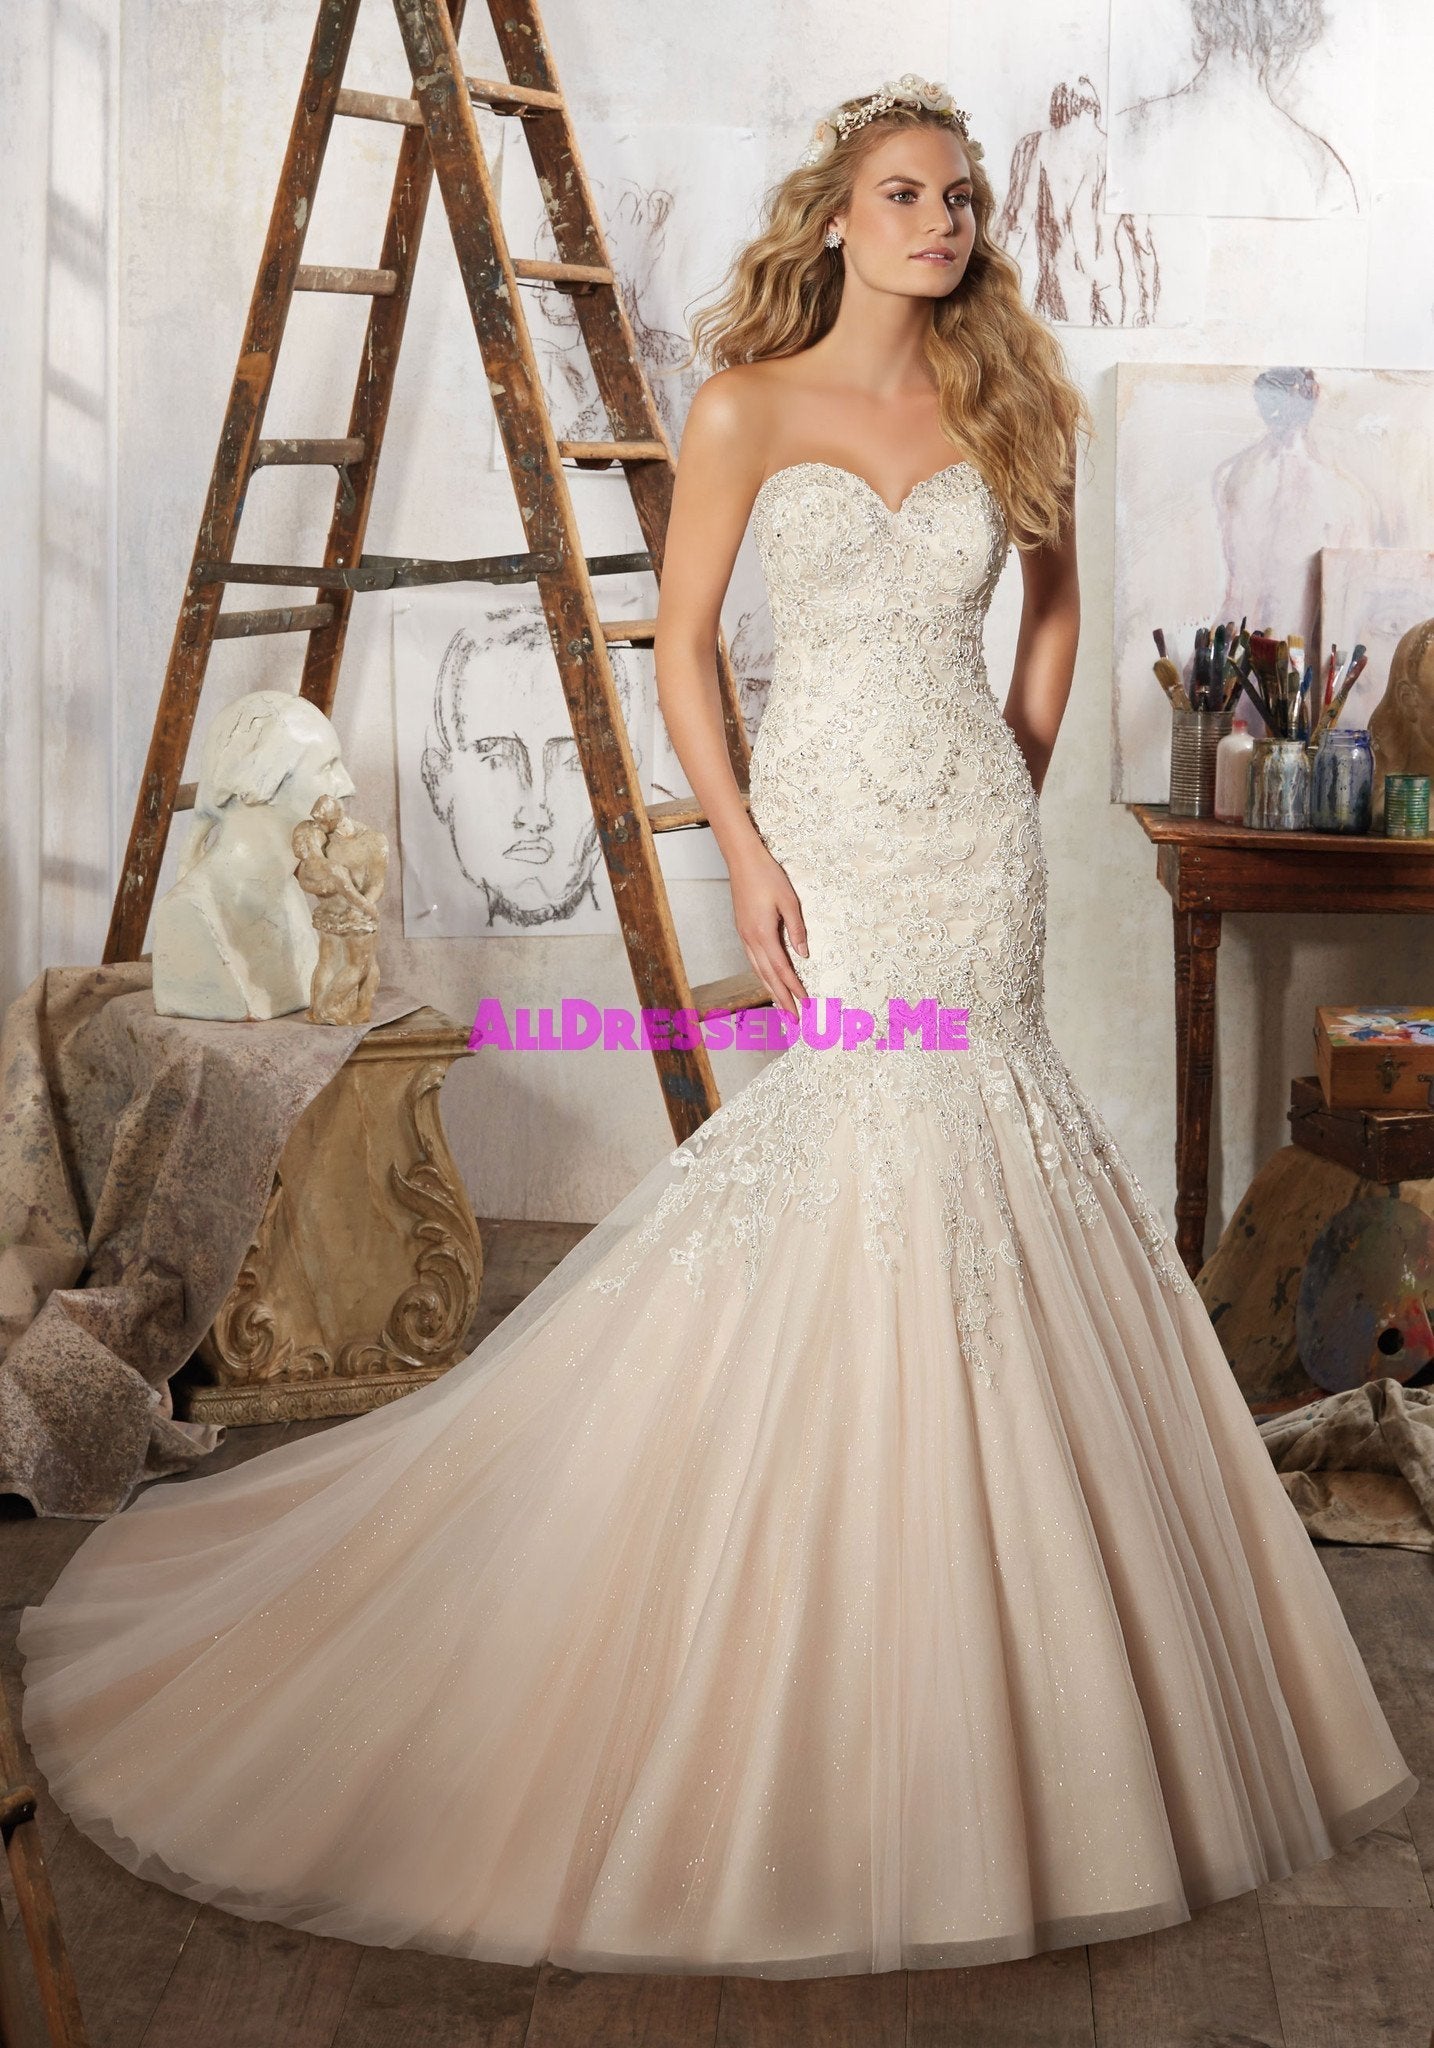 Morilee - Mariela - 8125 - Cheron's Bridal, Wedding Gown - Morilee Line - - Wedding Gowns Dresses Chattanooga Hixson Shops Boutiques Tennessee TN Georgia GA MSRP Lowest Prices Sale Discount